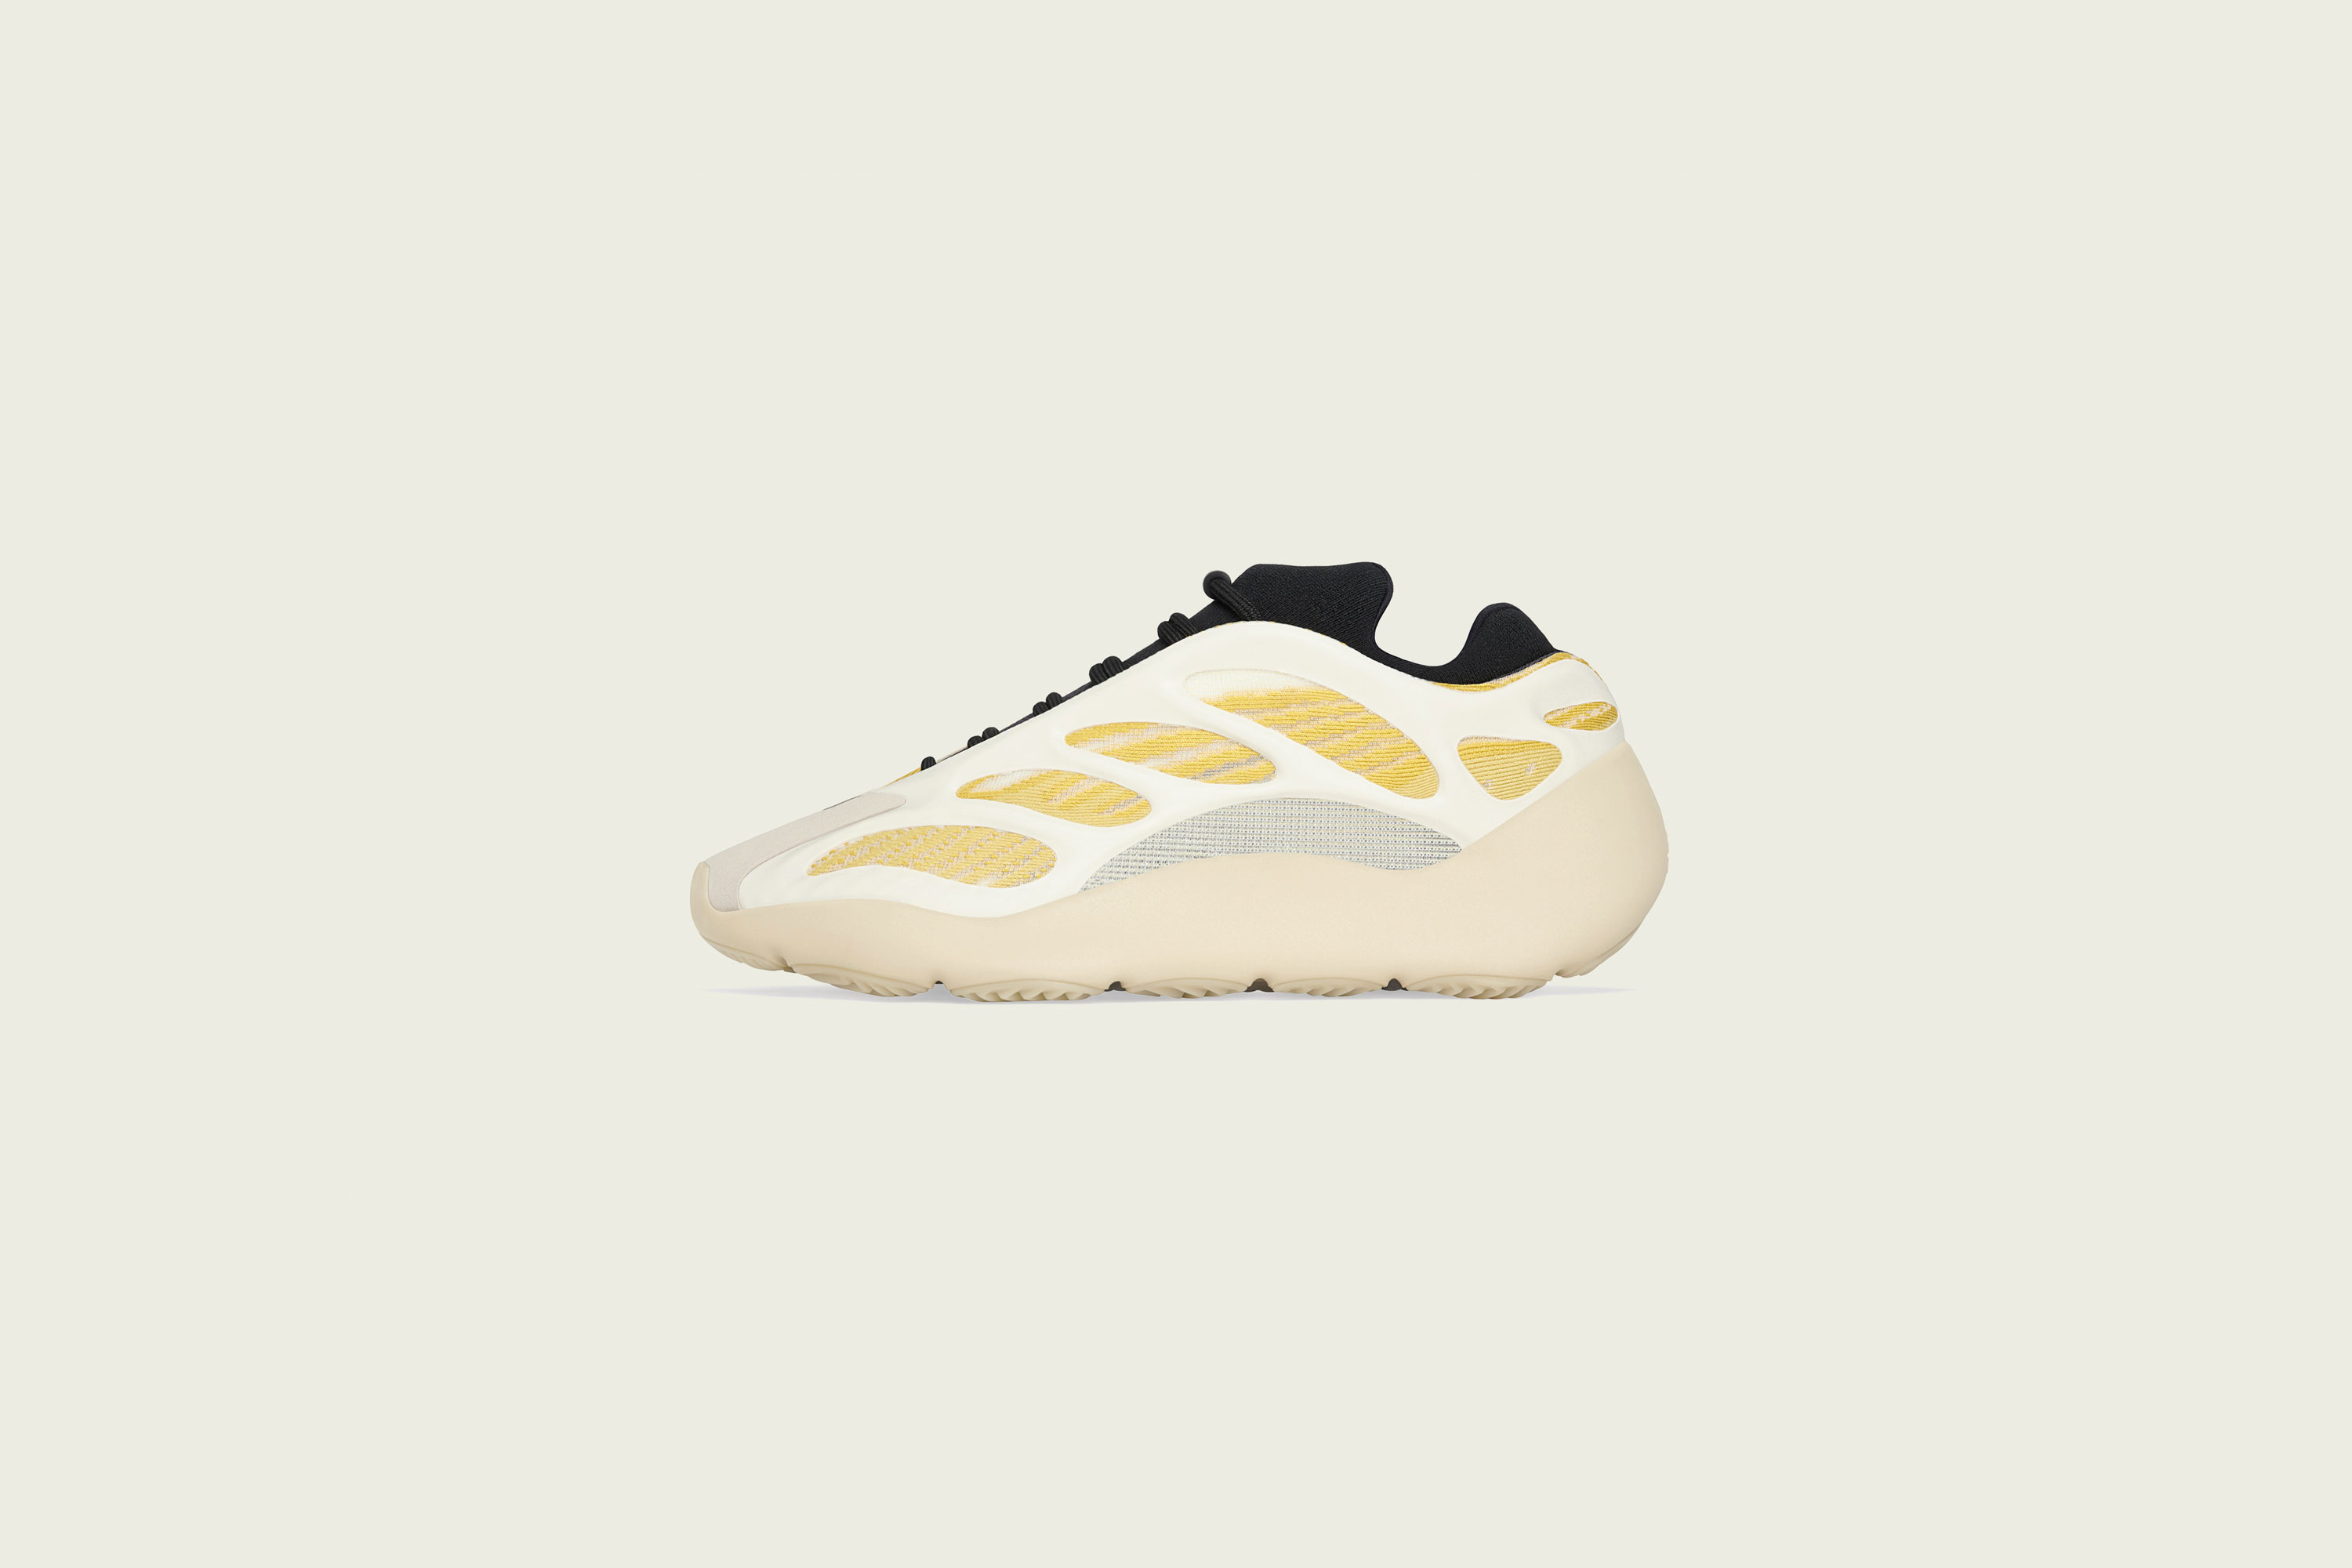 adidas - Yeezy 700v3 - Safflower - Up There